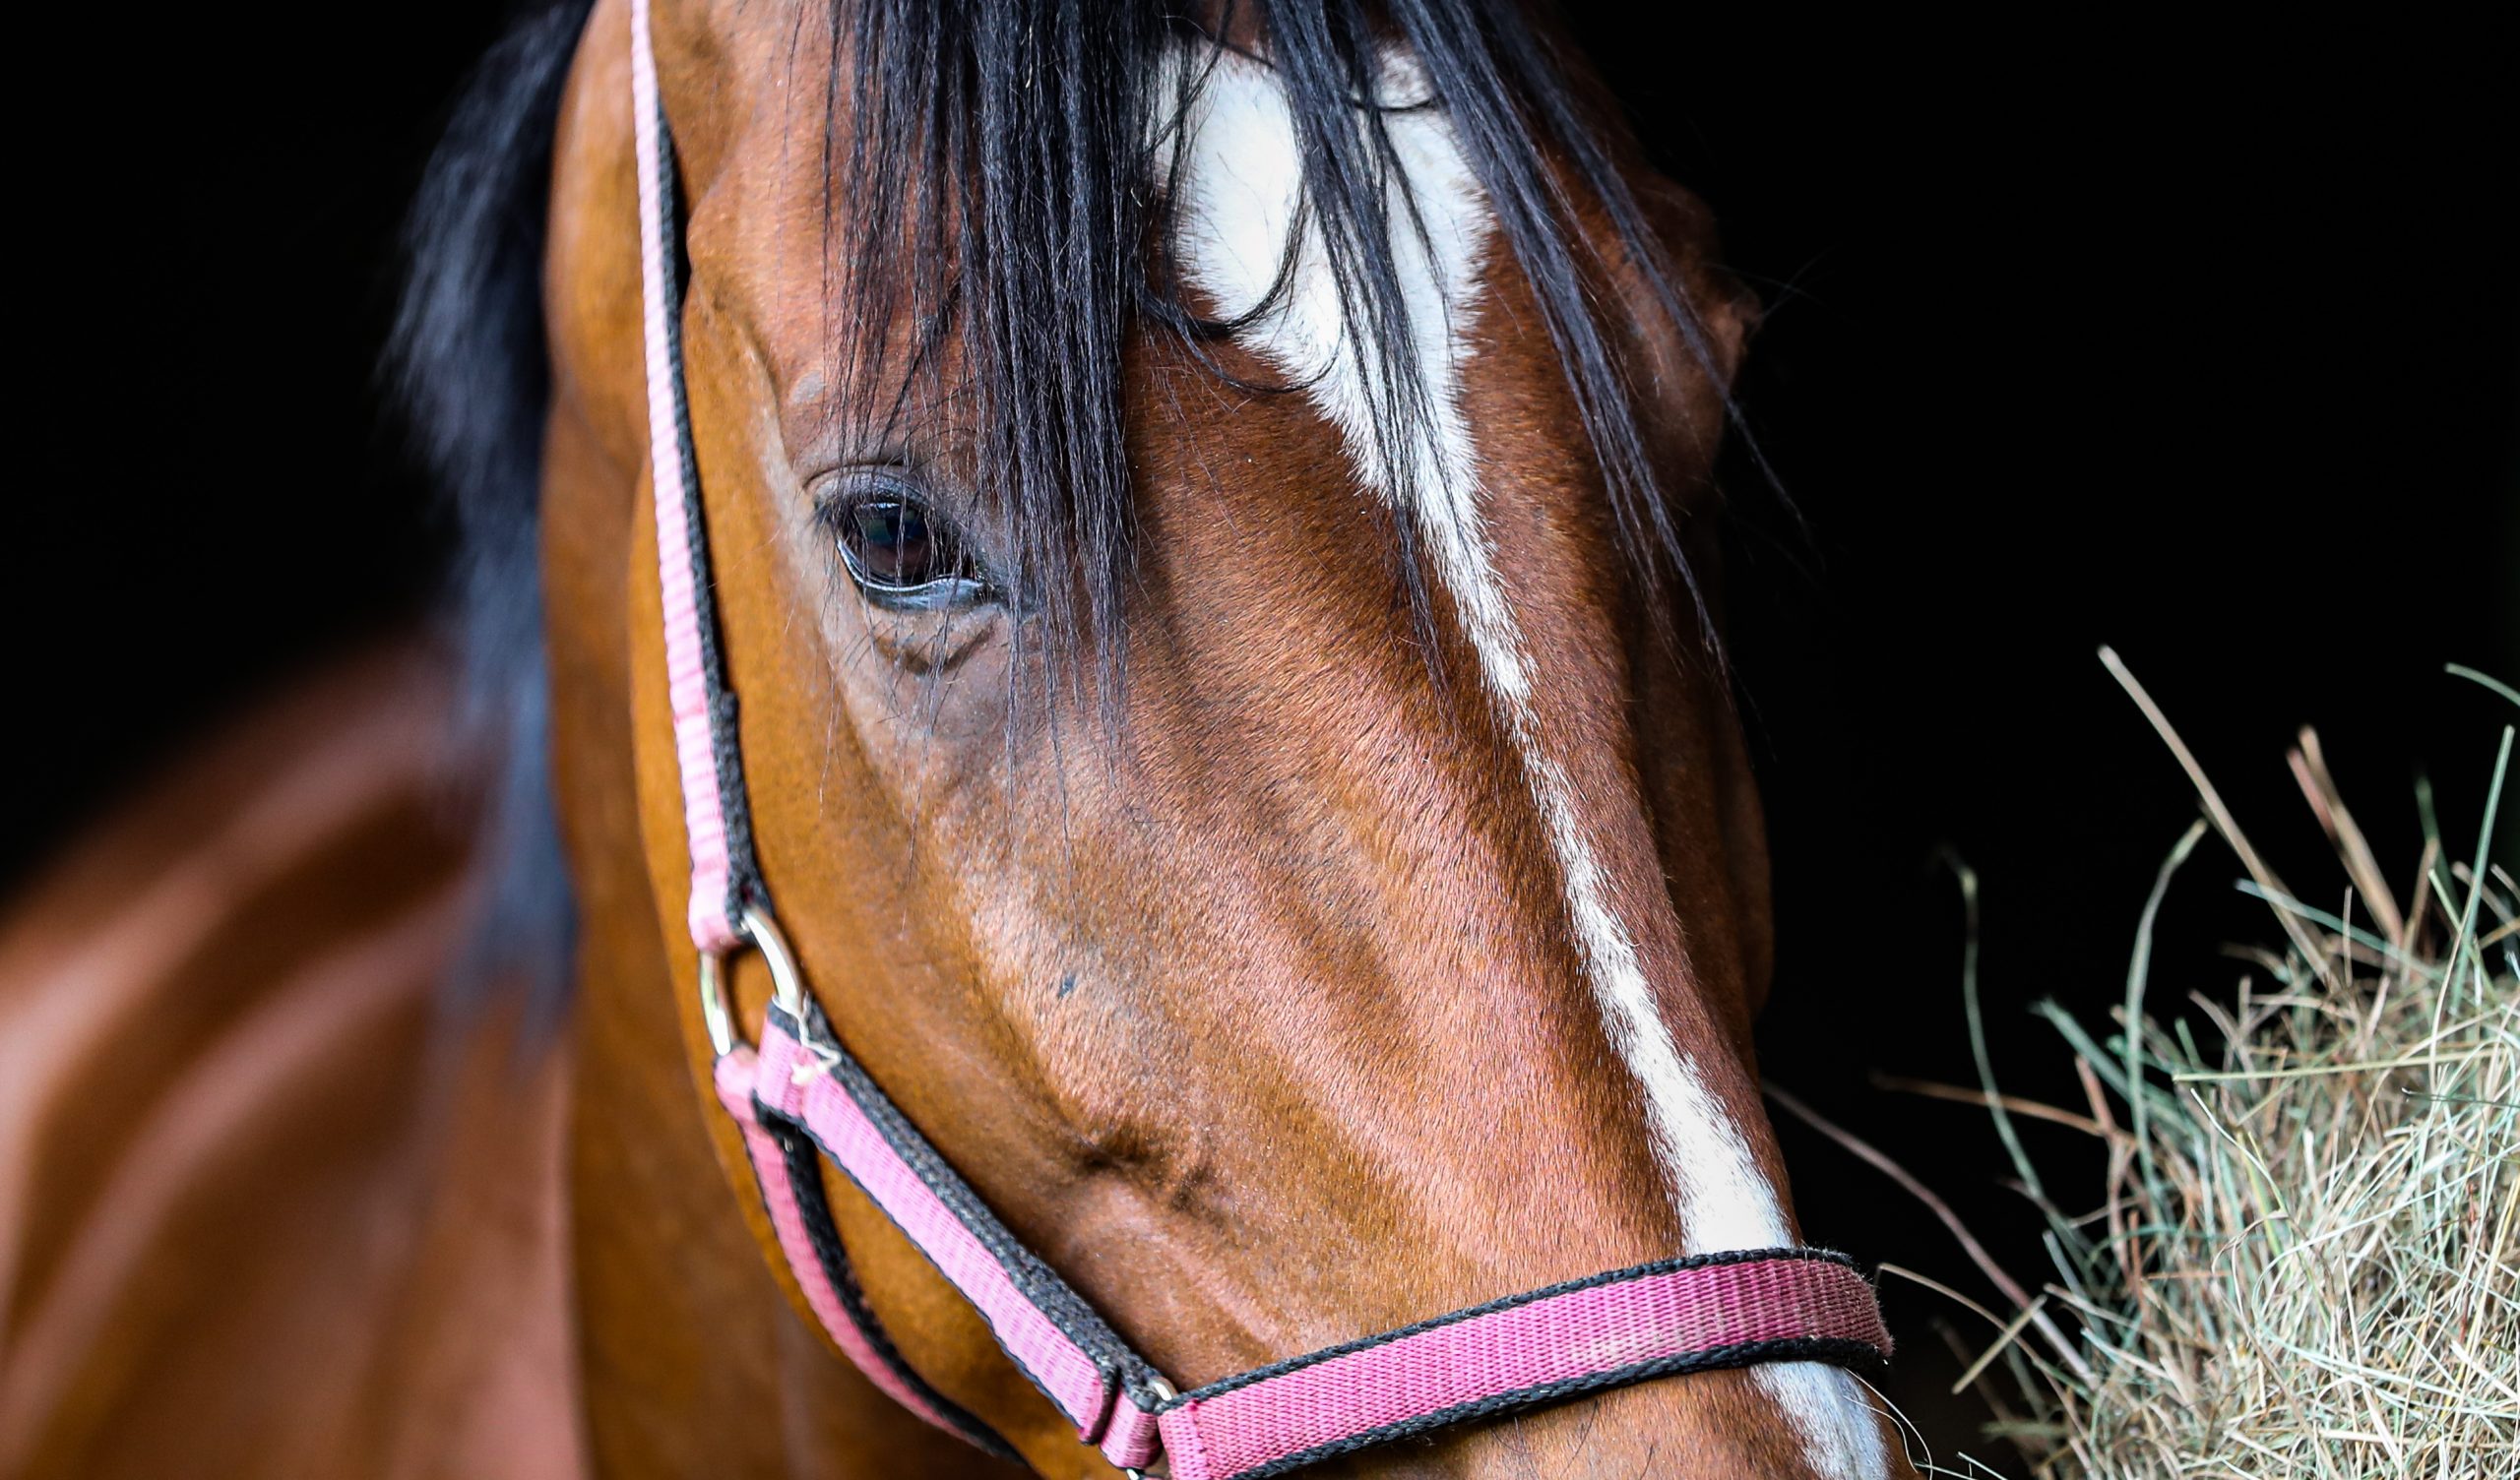 Upclose photo of horse face